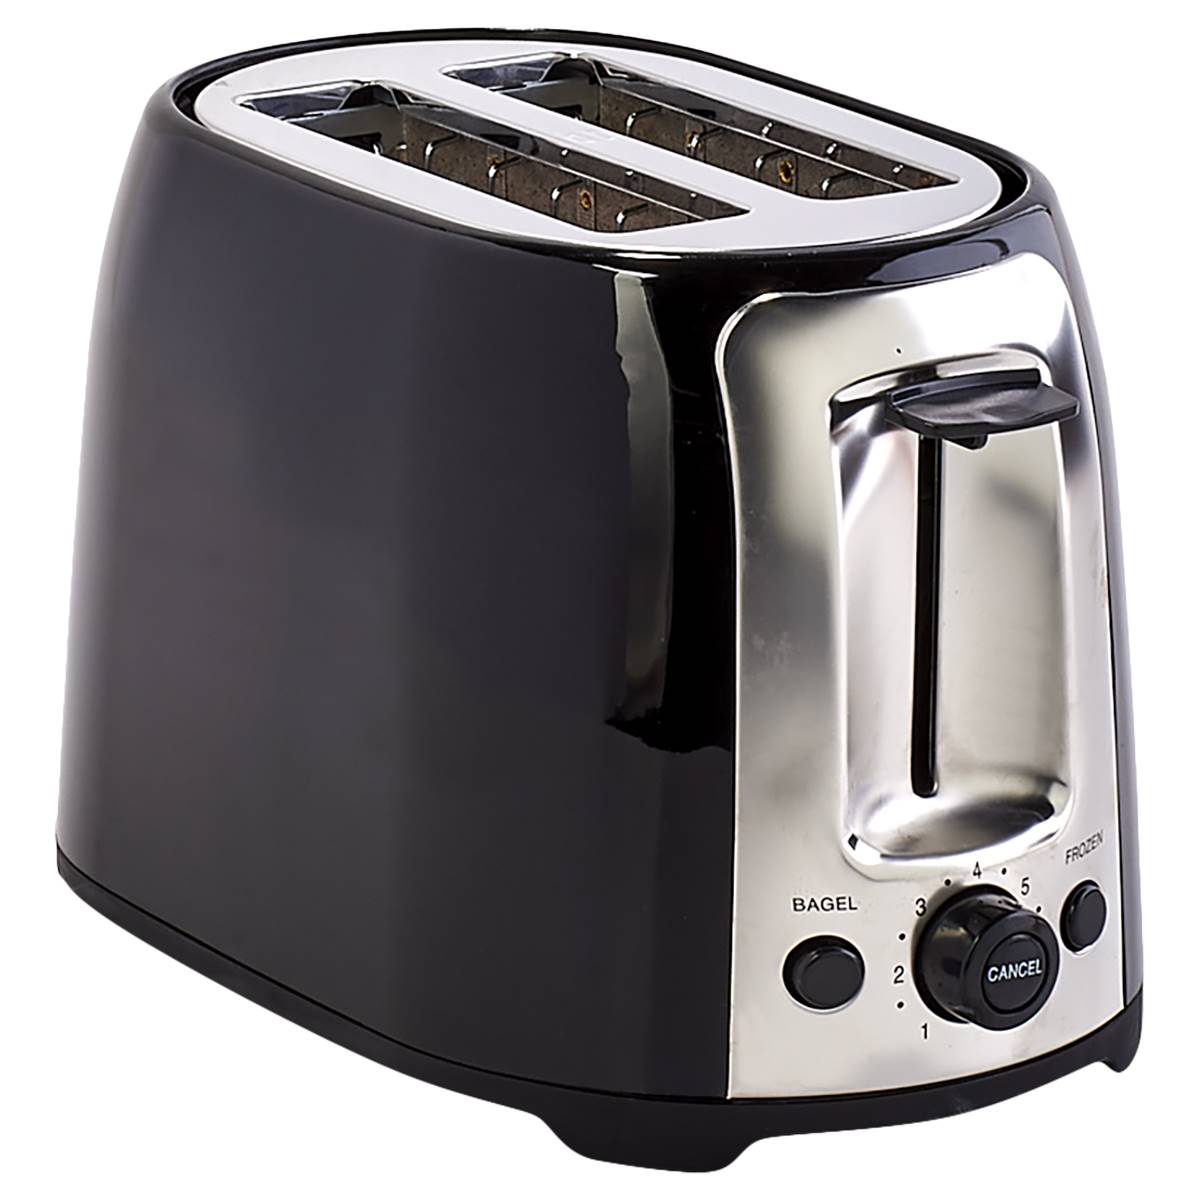 Culinary Edge 2 Slice Extra Wide Toaster